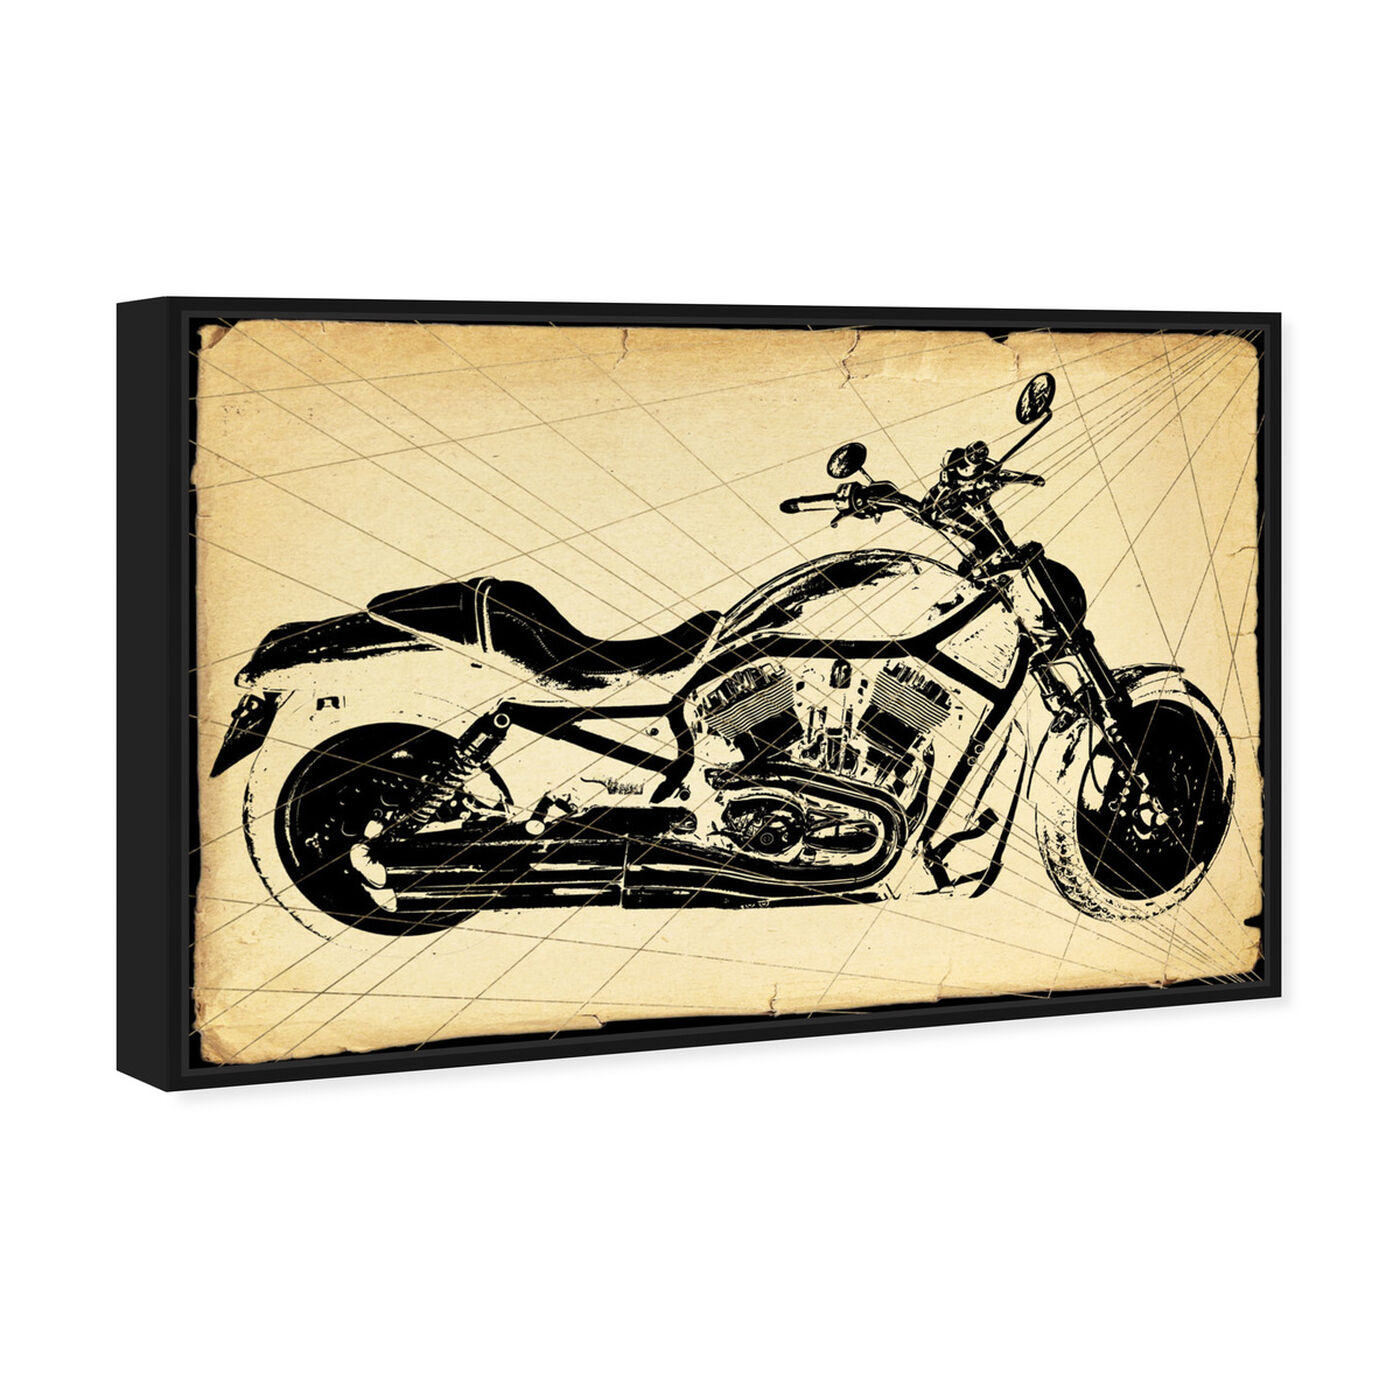 Angled view of Harley Print featuring transportation and motorcycles art.